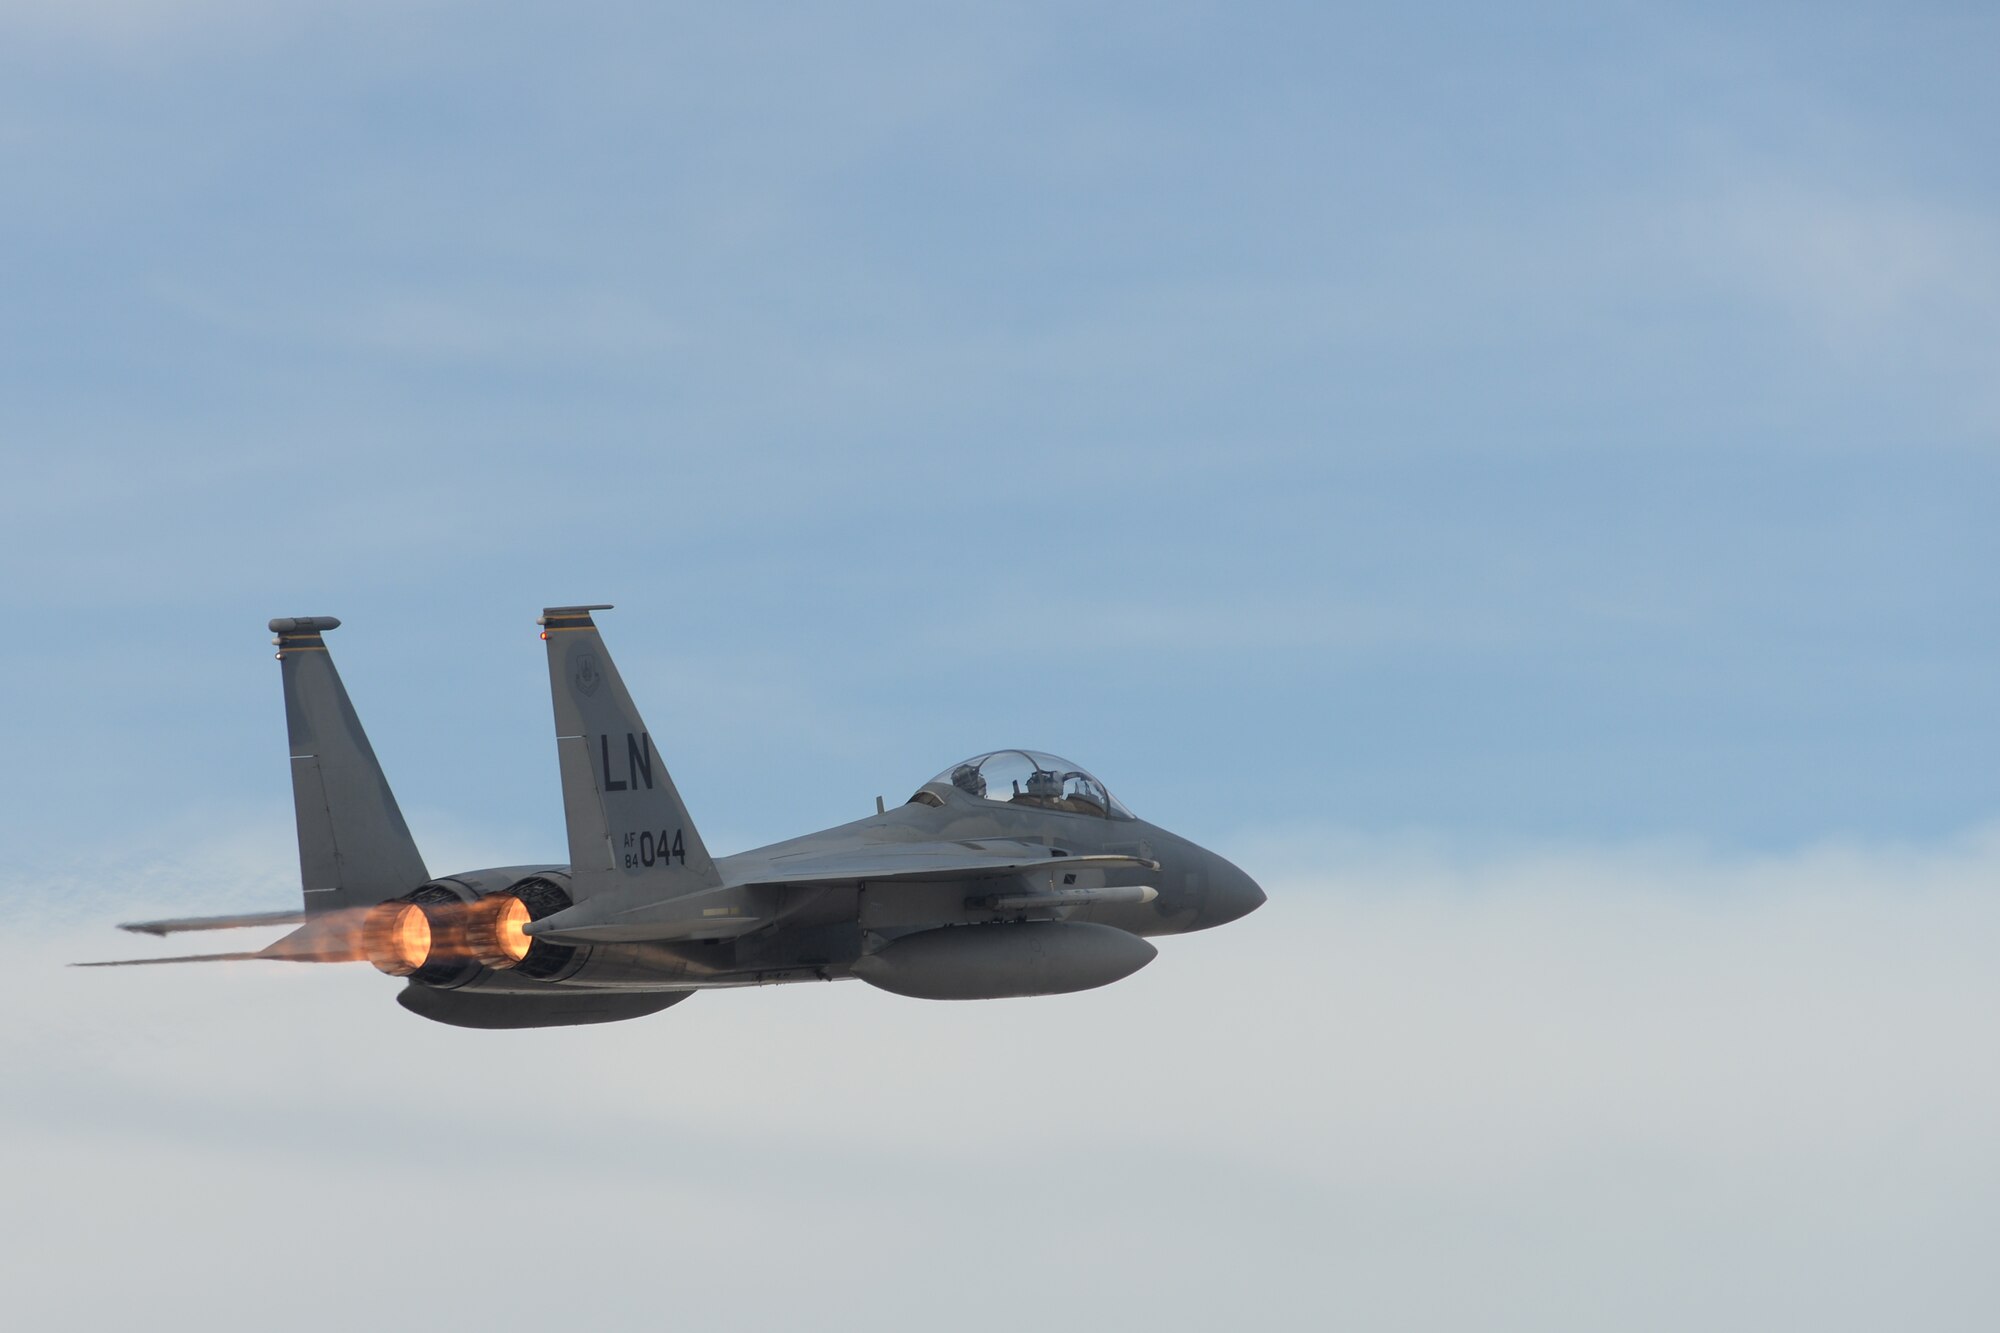 An F-15D Eagle assigned to the 493rd Fighter Squadron, Royal Air Force Lakenheath, England, takes off during Red Flag 15-1 at Nellis Air Force Base, Nev., Feb. 2, 2015. Flying units from around the world come to Nellis AFB to participate in Red Flag exercises, which are held three to four times per year. (U.S. Air Force photo by Tech. Sgt. Eric Burks/Released)